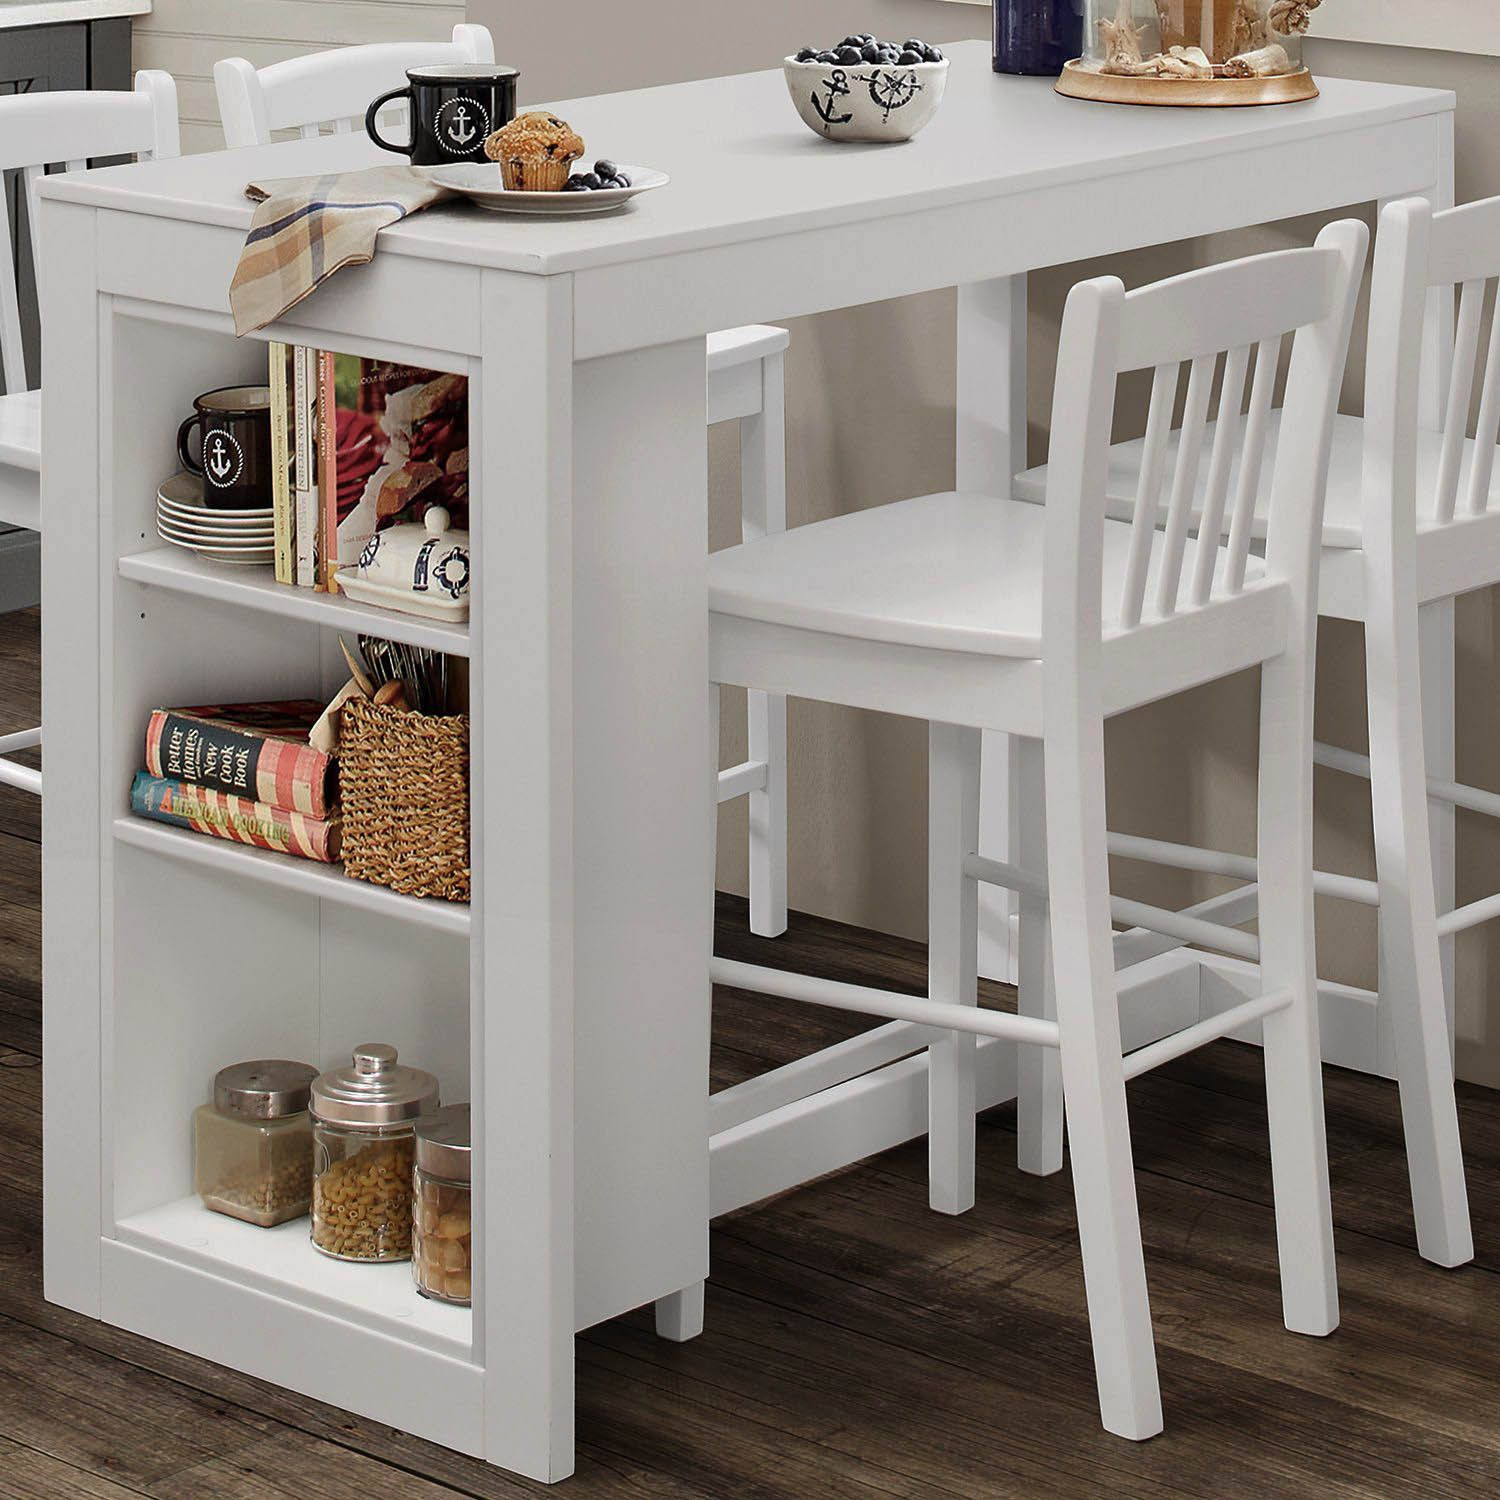 Cheap Small Kitchen Table Sets
 Your Guide to cheap kitchen table sets for 2 for your cozy